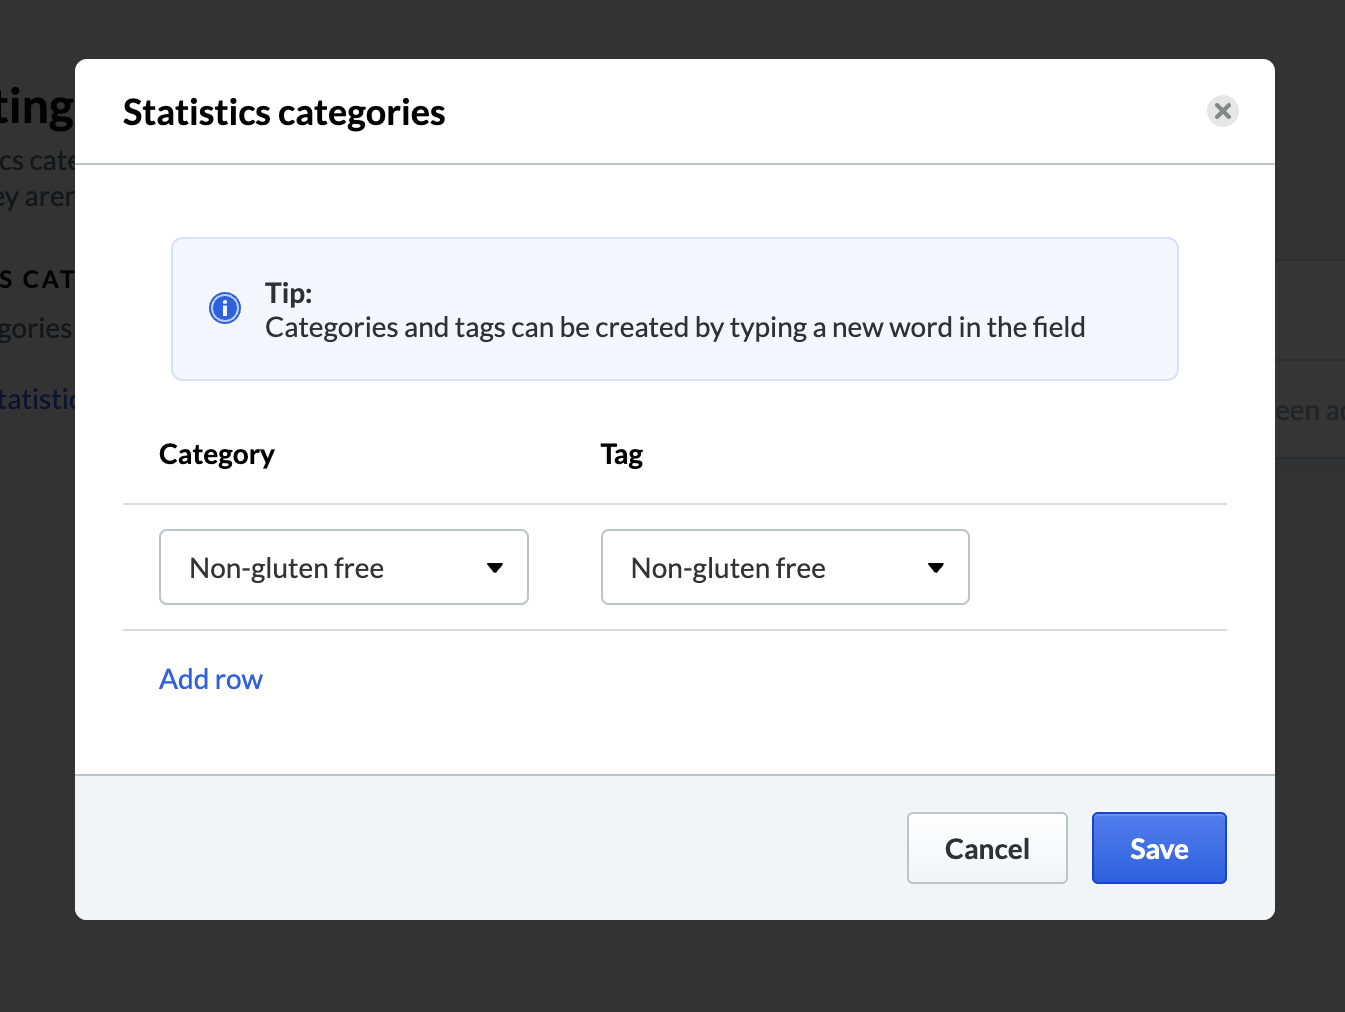 The 'Category' and 'Tag' fields filled in examples in the statistics category prompt